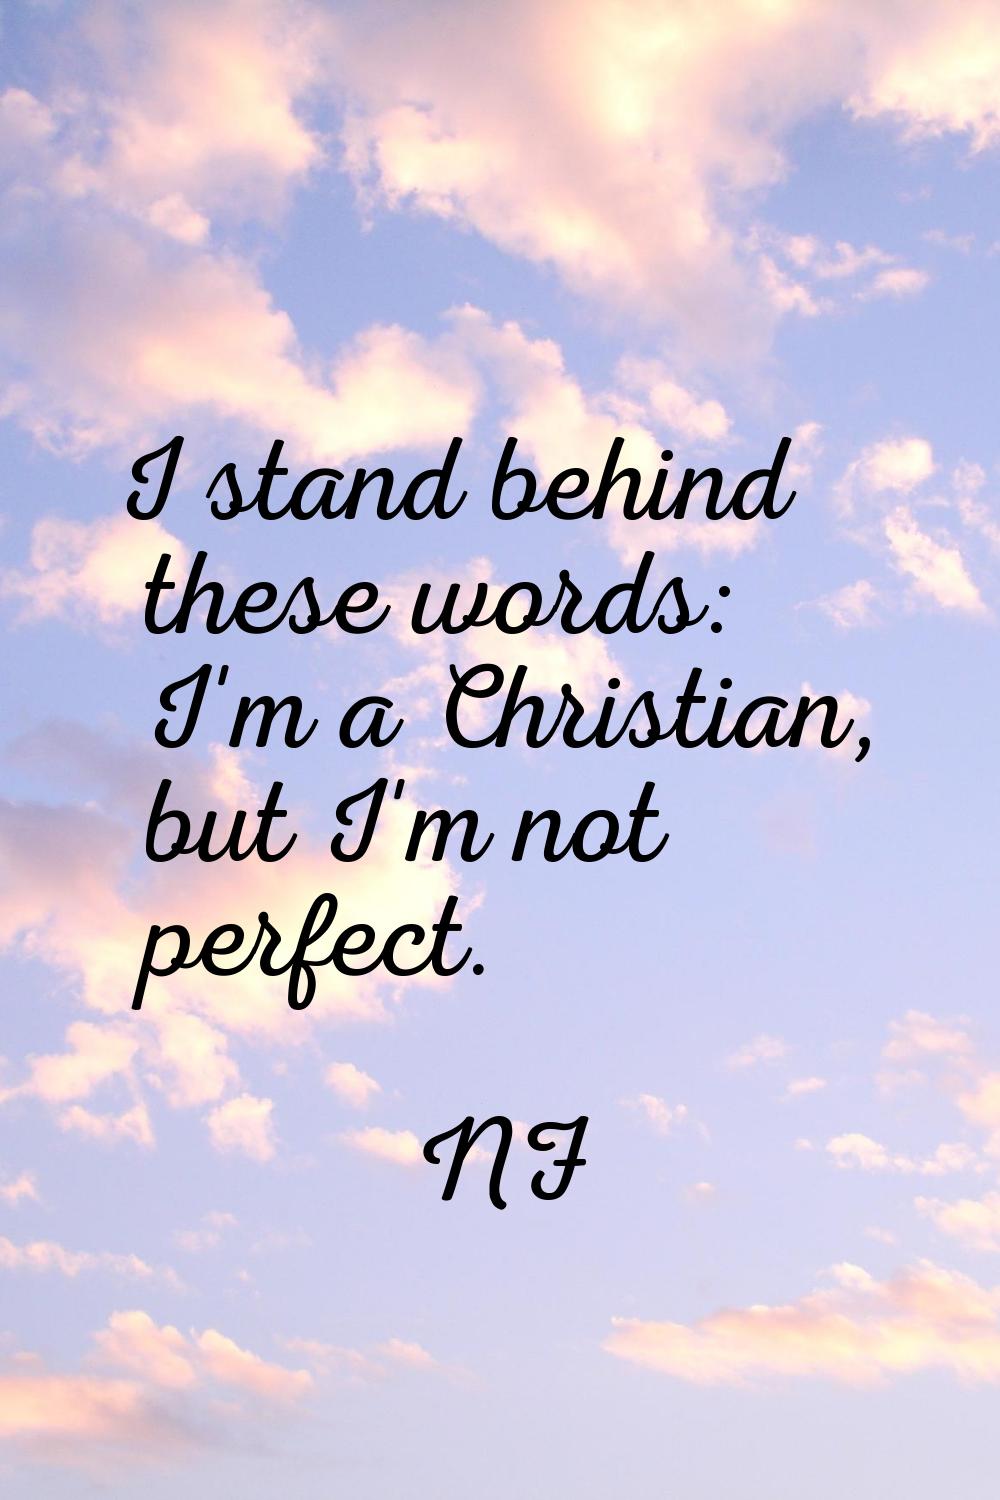 I stand behind these words: I'm a Christian, but I'm not perfect.